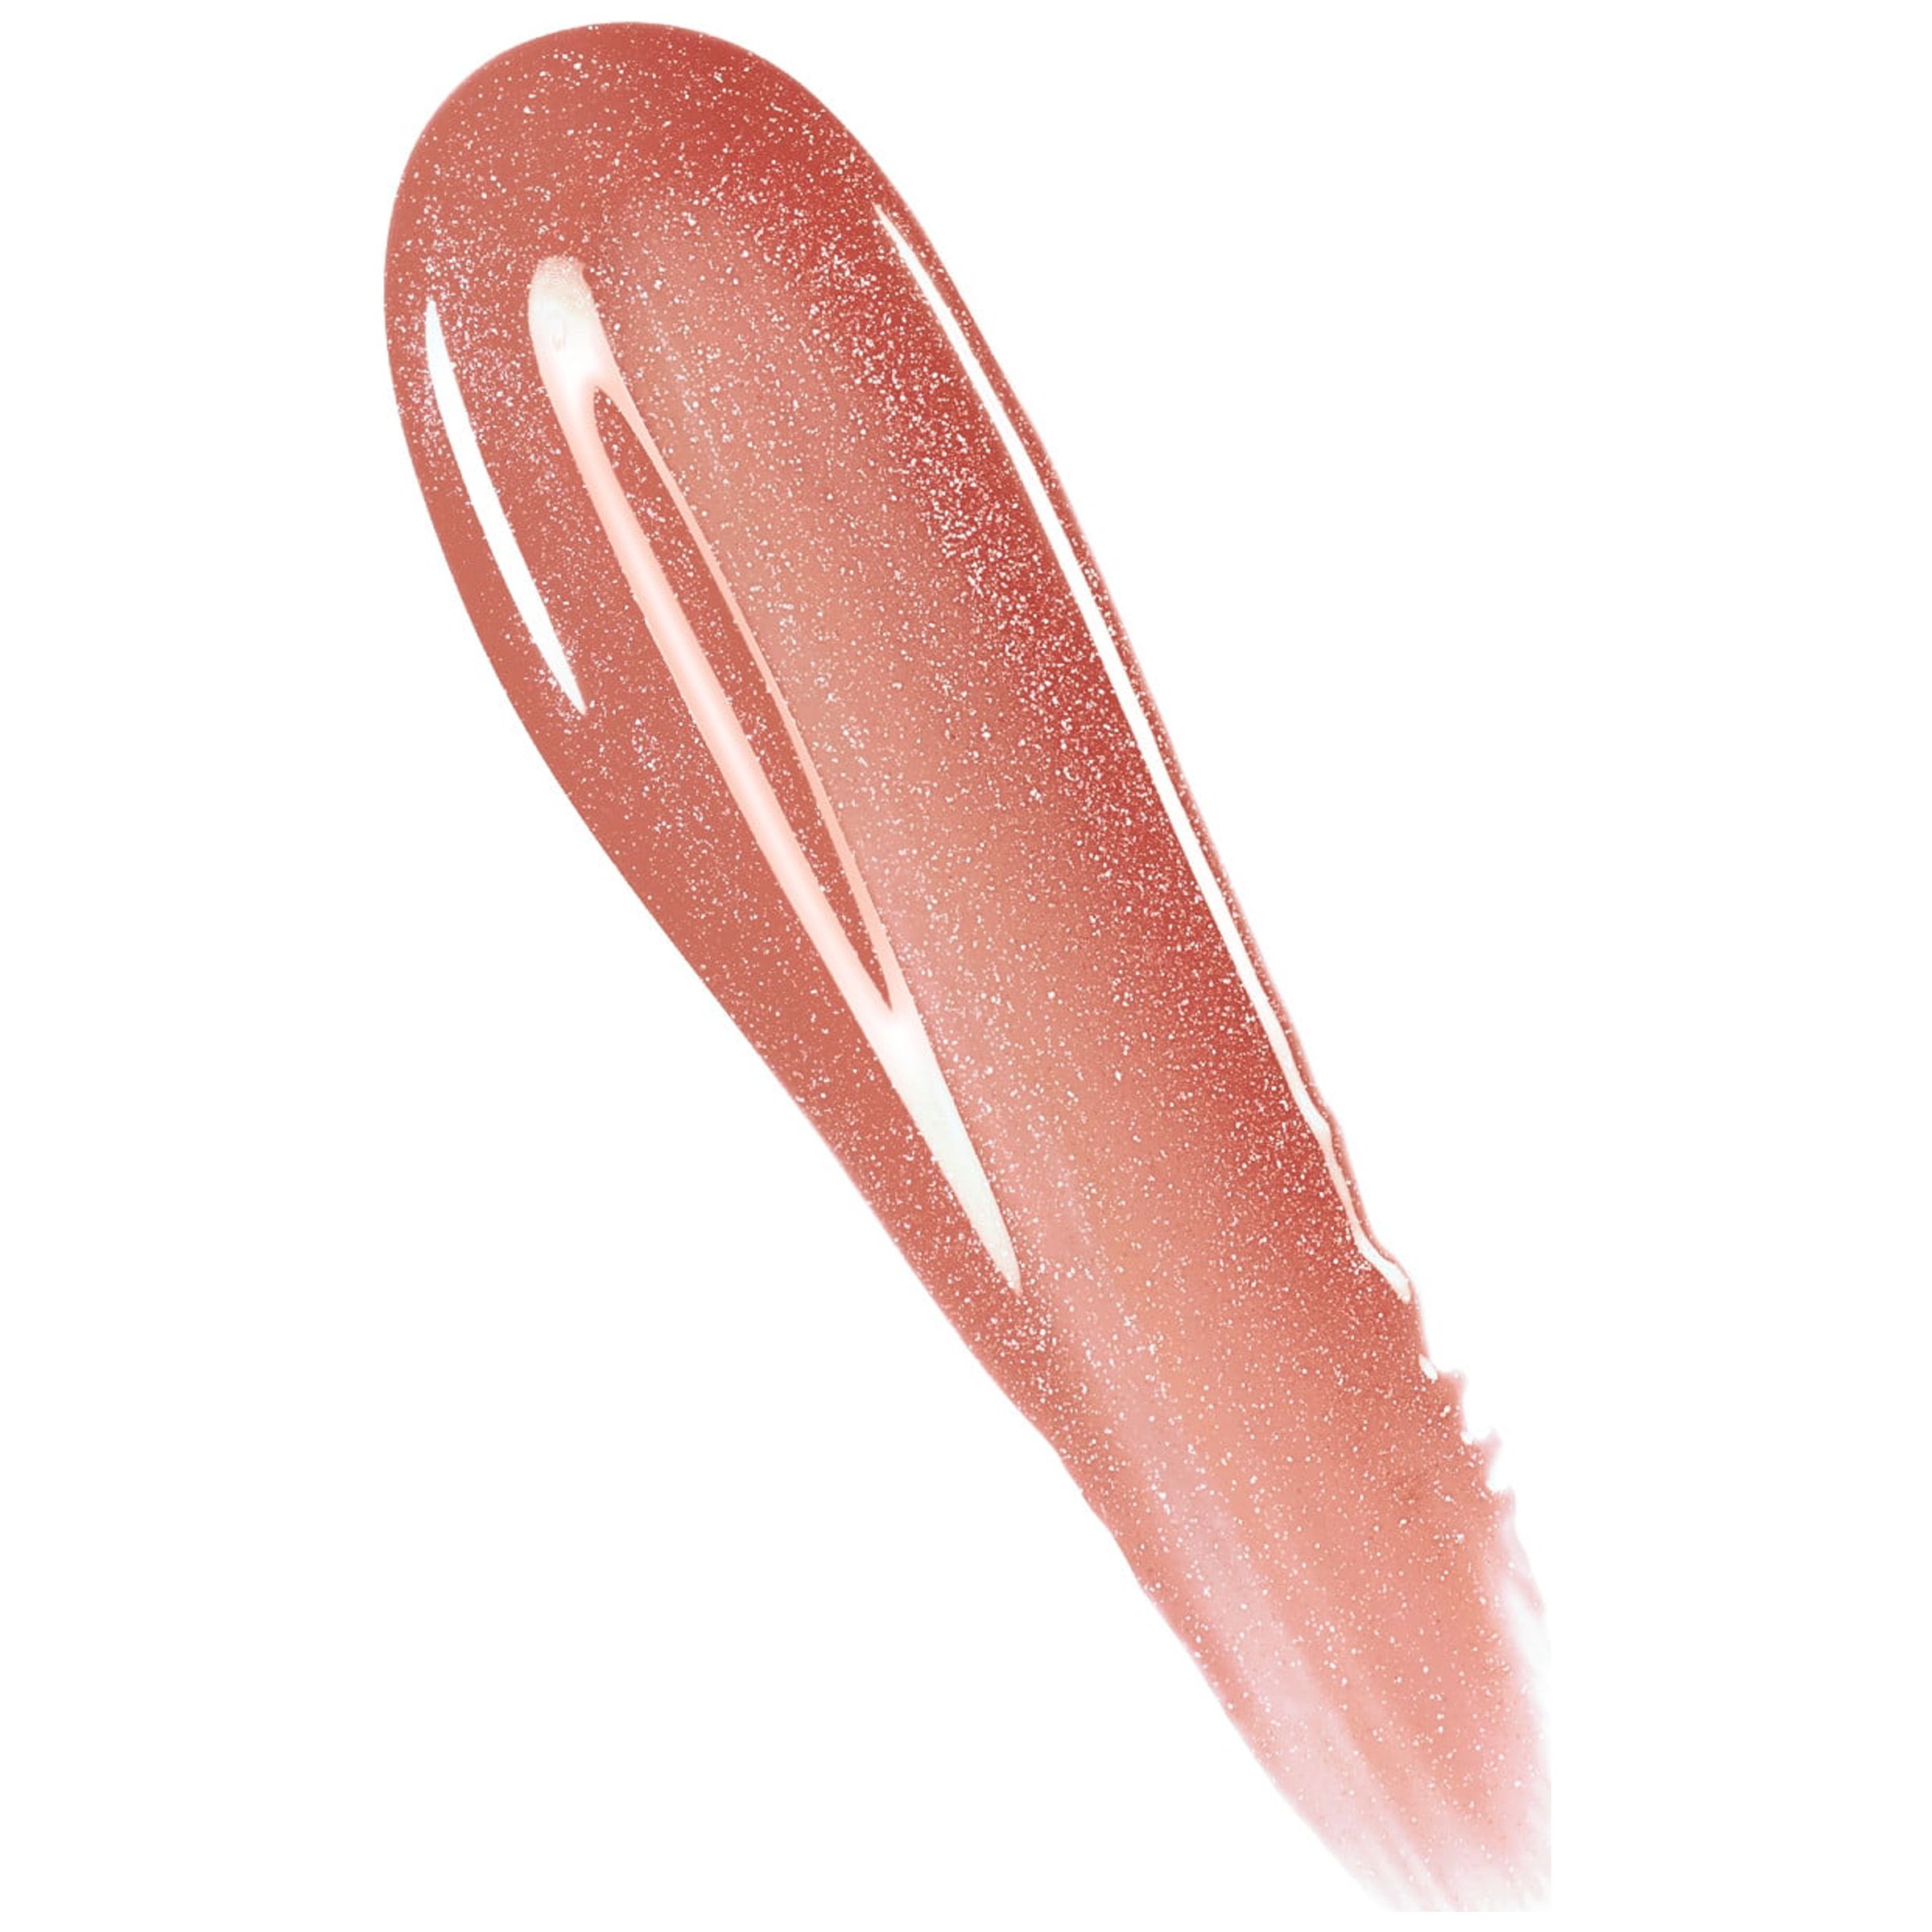 Rimmel Stay Glossy Lip Gloss, Non-Stop Glamour, 0.18 oz - image 3 of 10